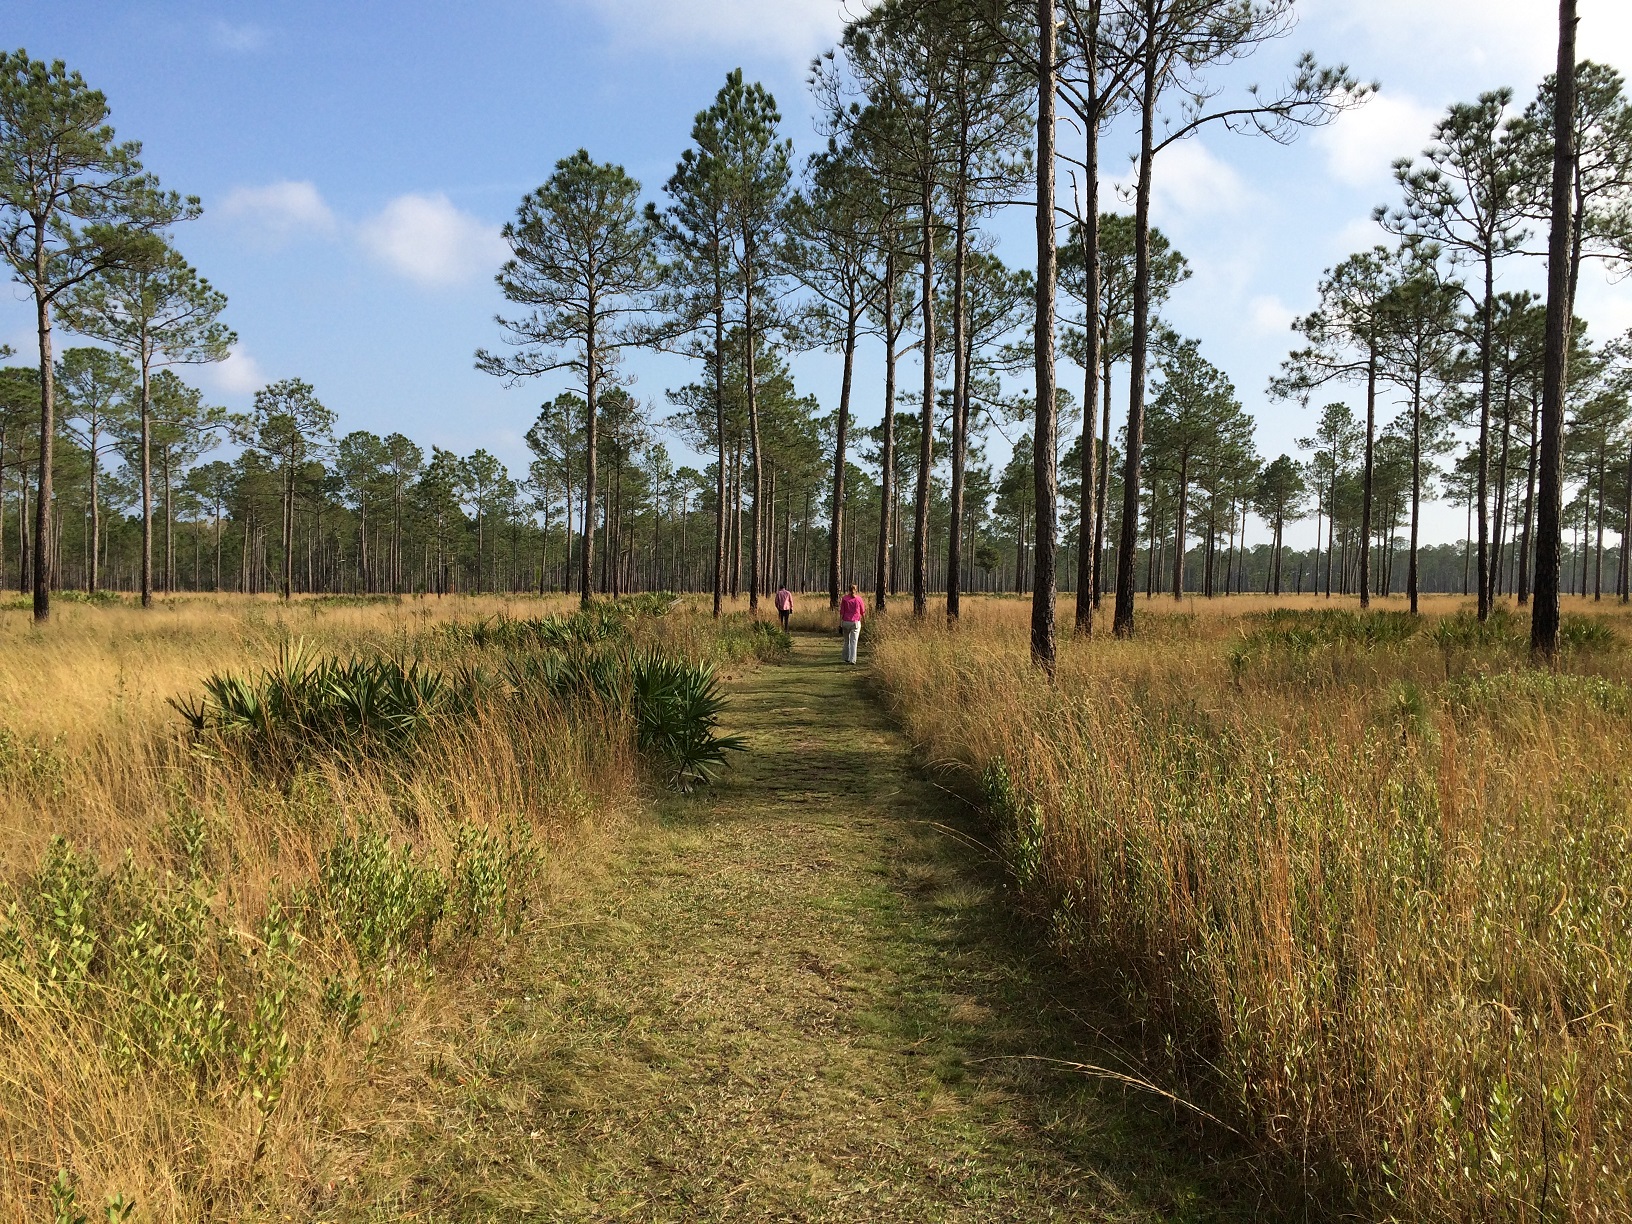 Longleaf pine stand with open, grassy understory.